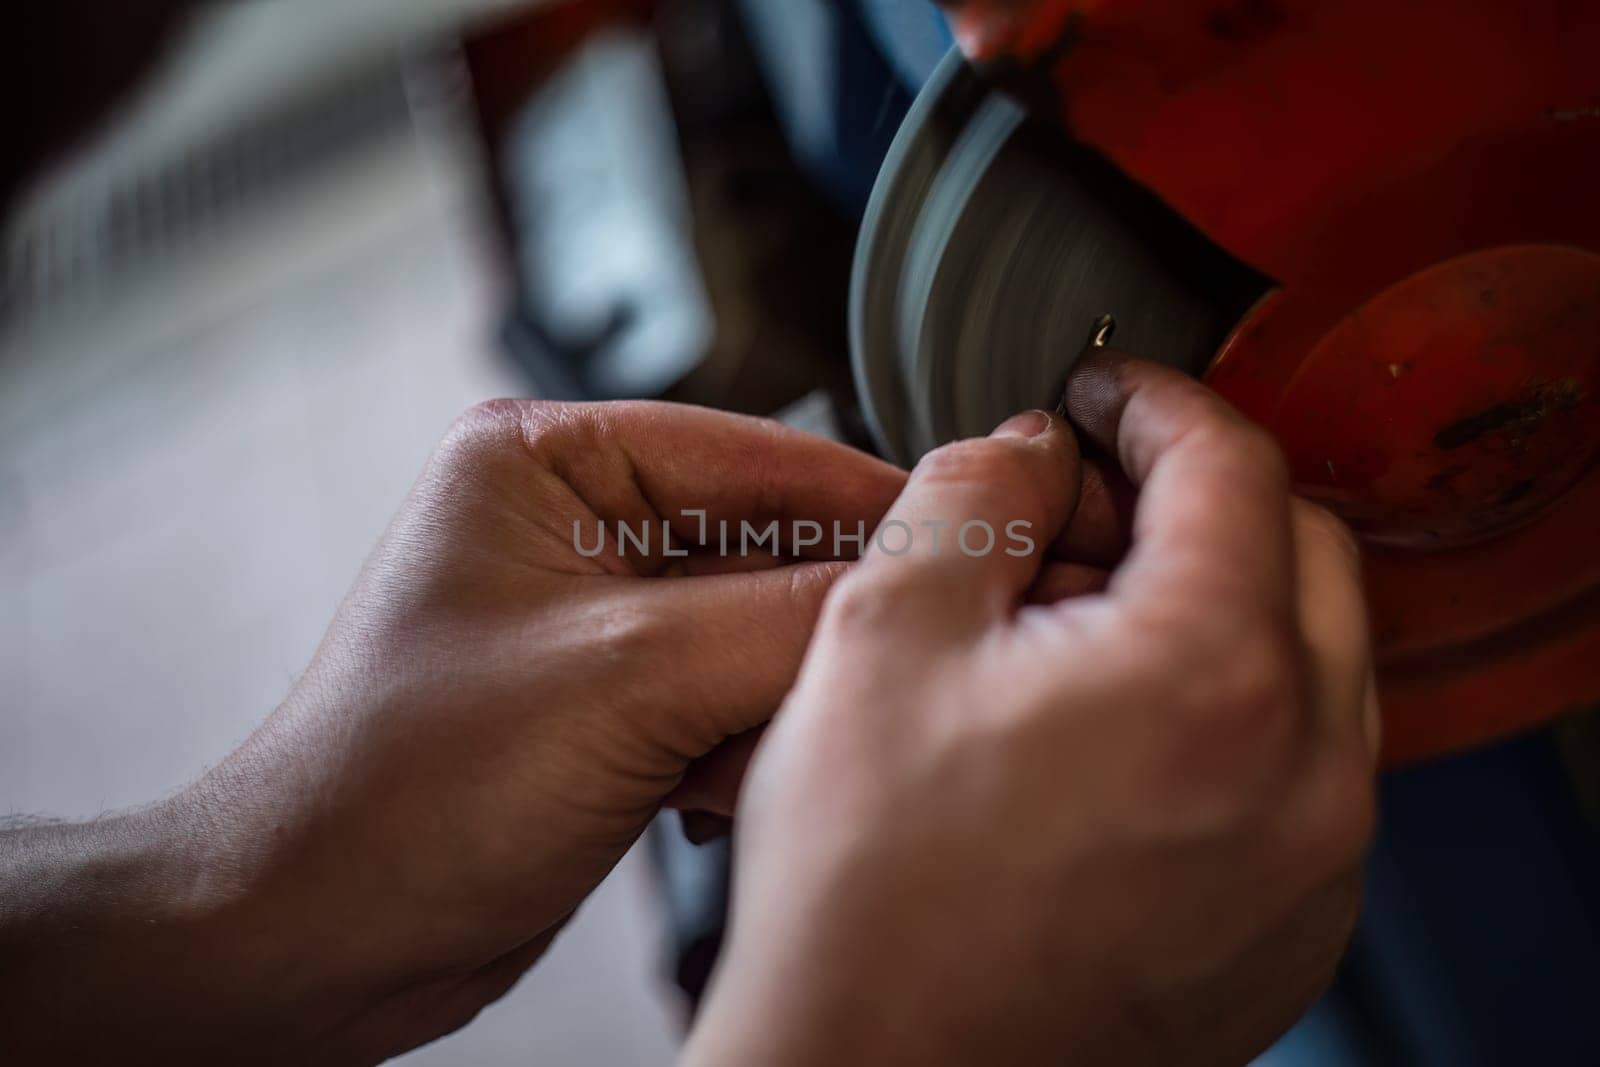 Mechanic's hands expertly sharpening a drill bit on a grinding wheel in a workshop.